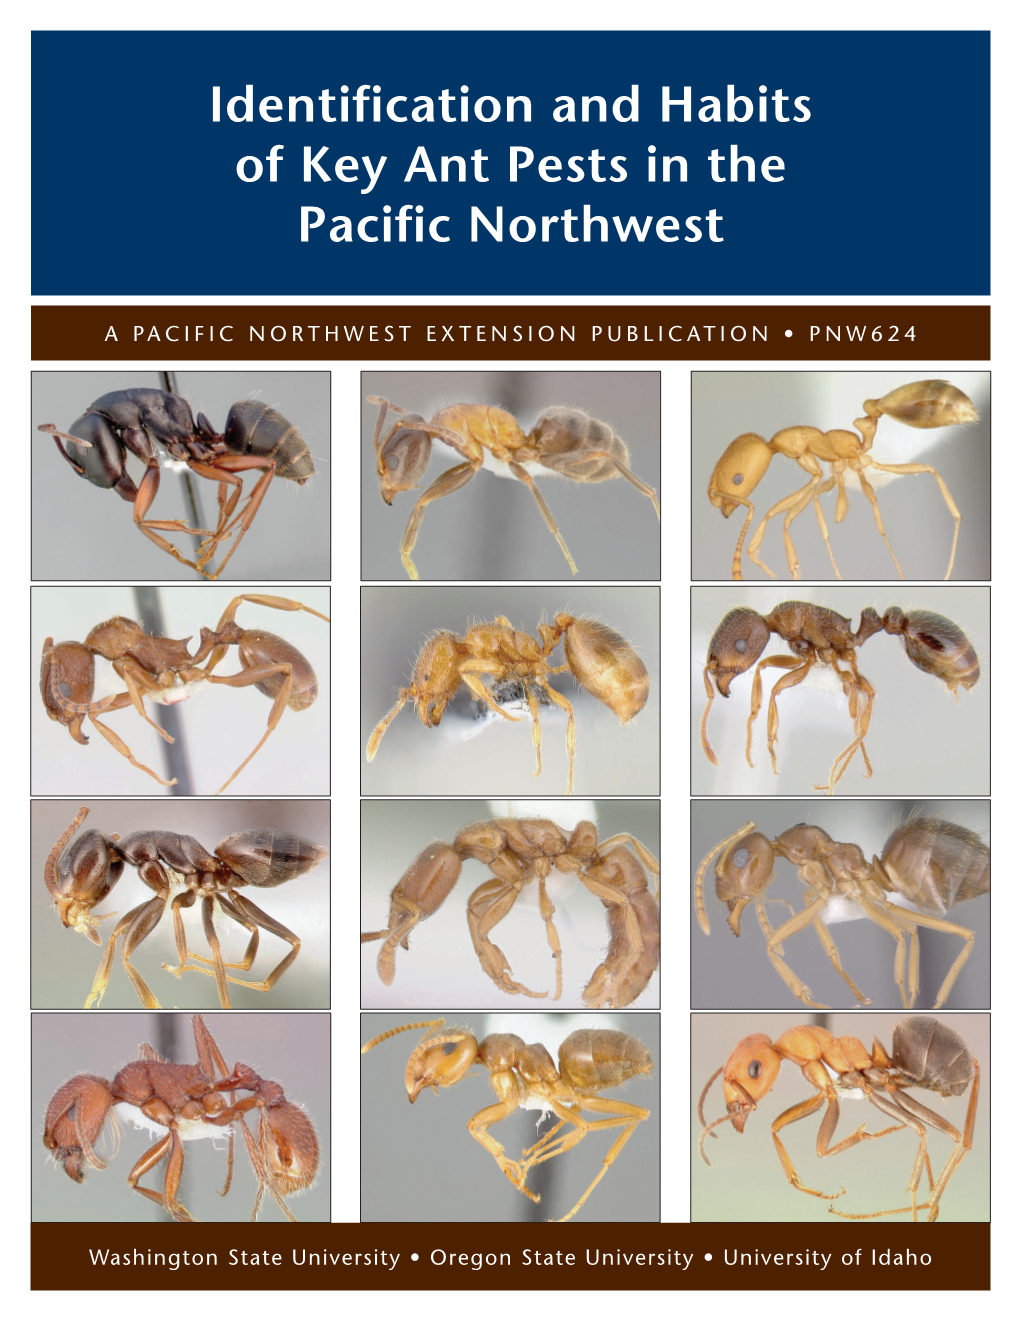 Identification and Habits of Major Ant Pests in the Pacific Northwest